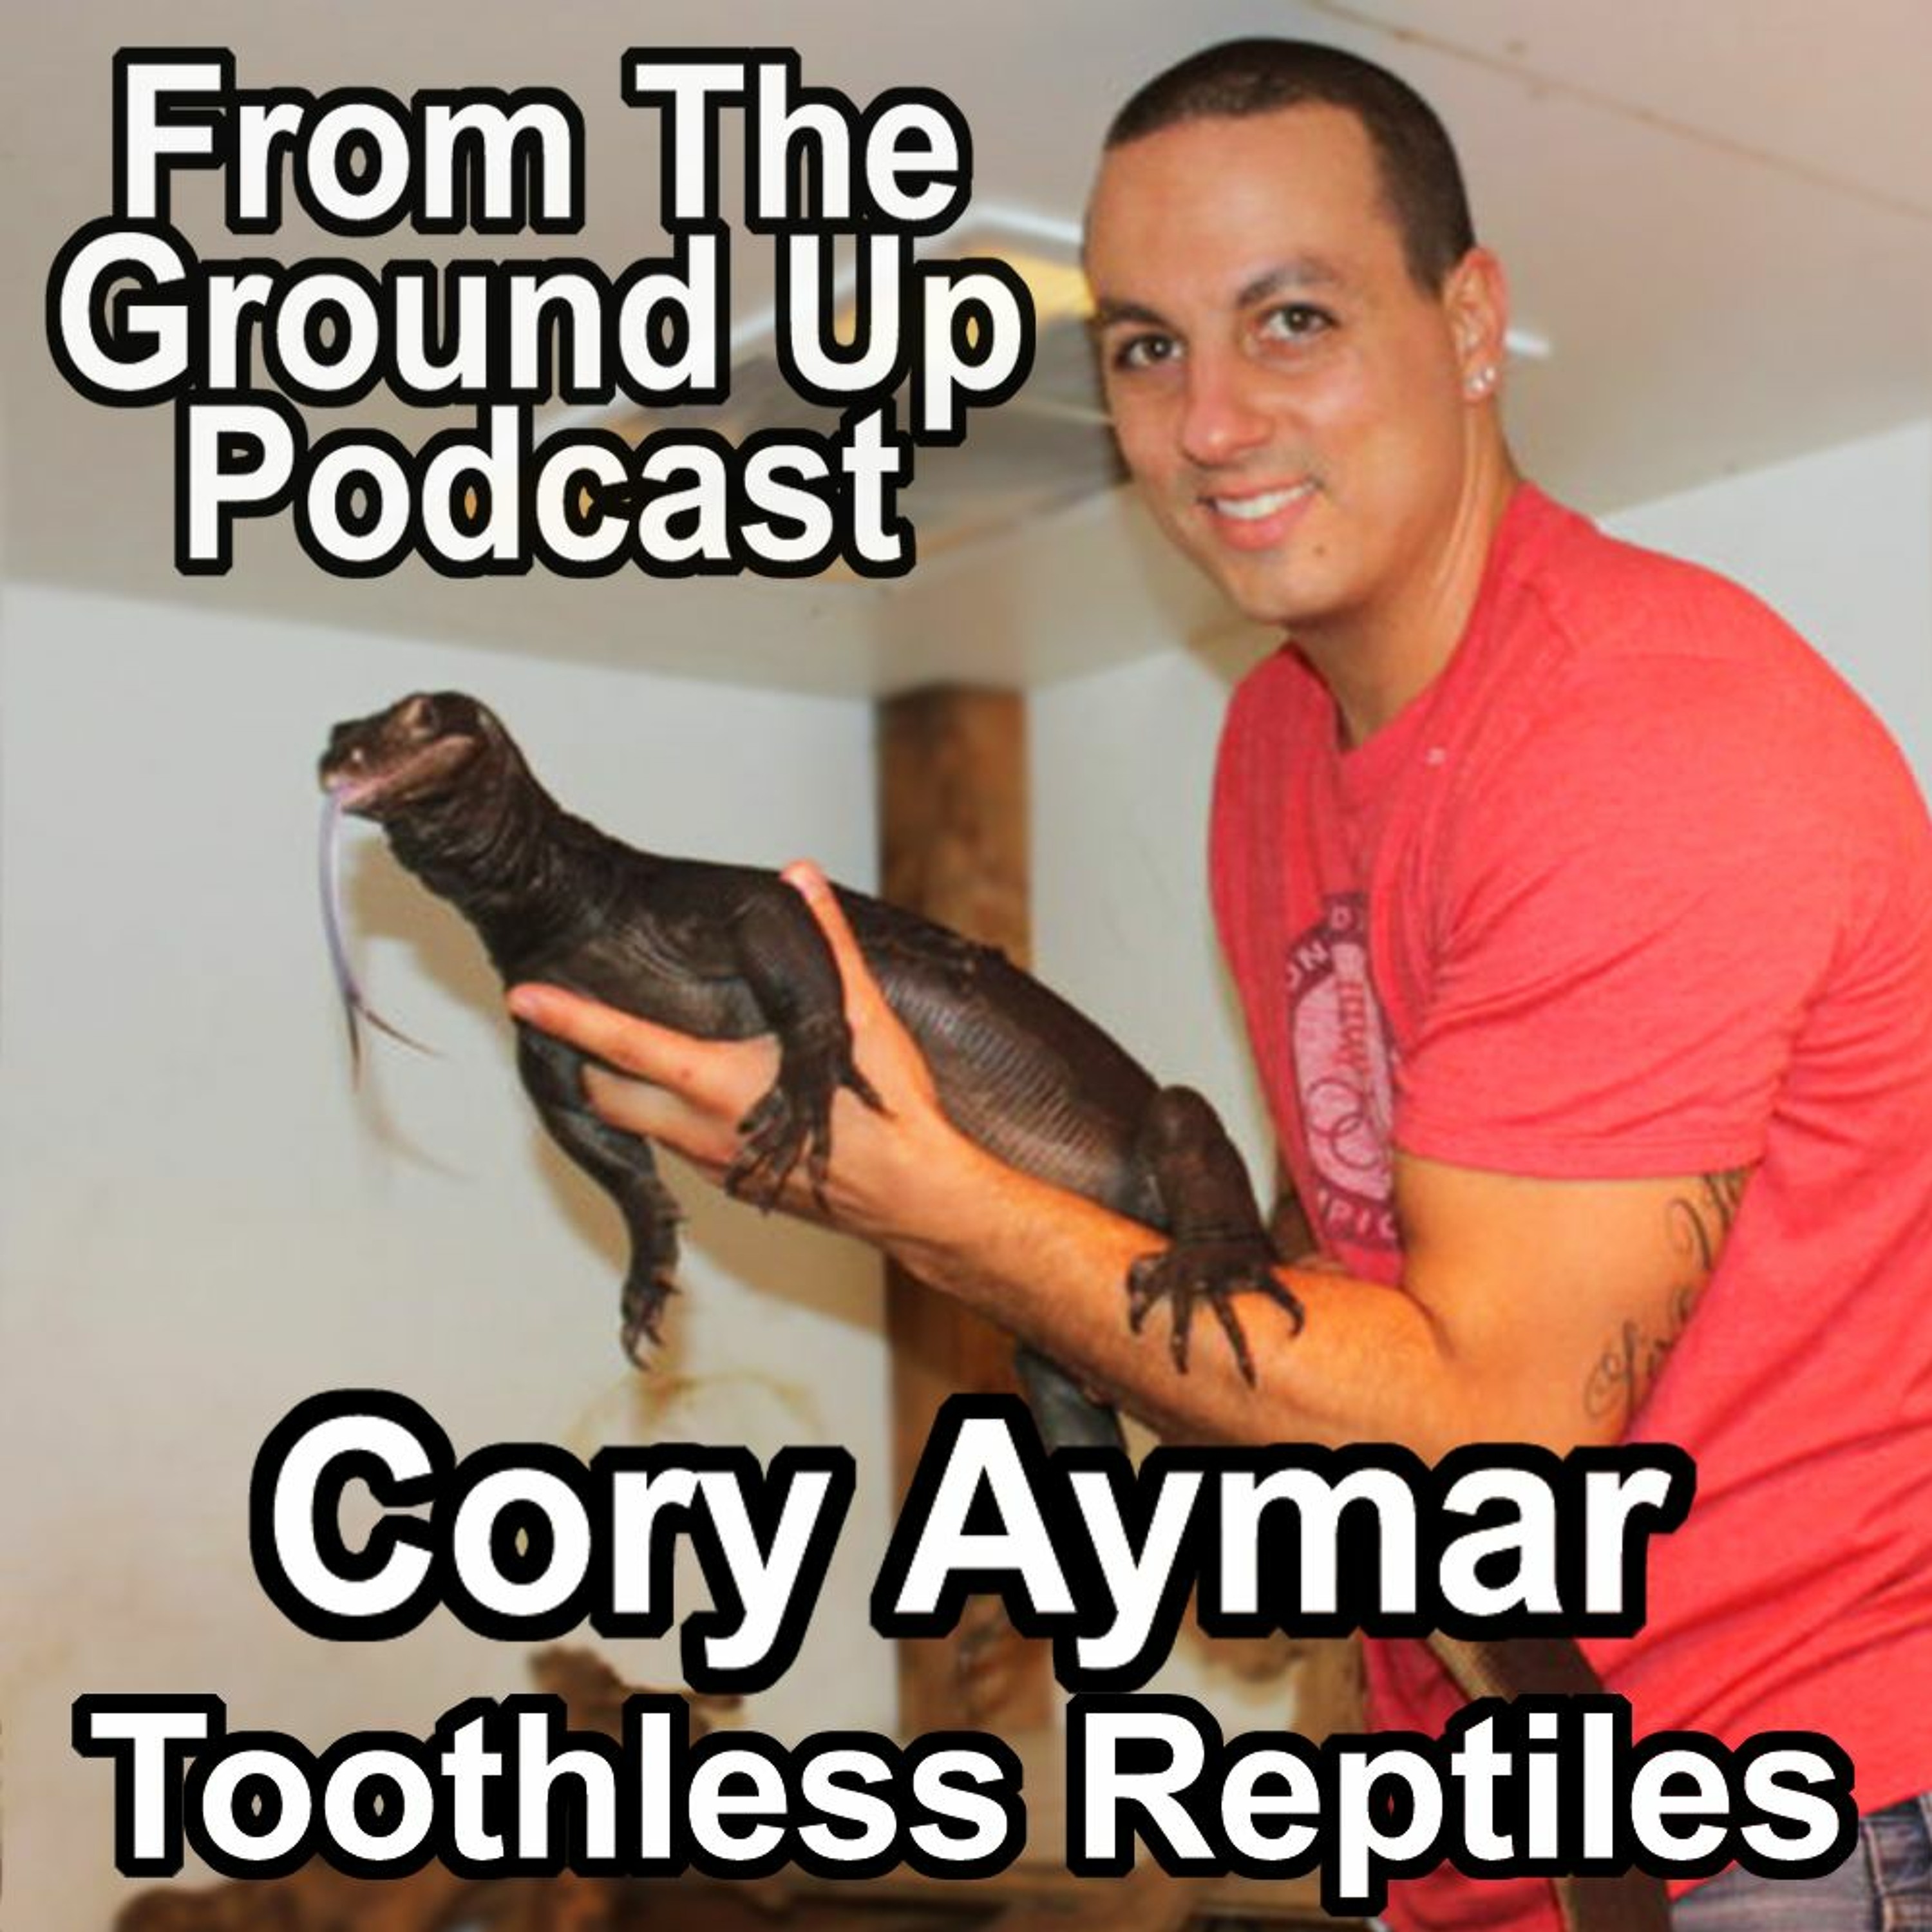 $140k+ Facility for his Monitors W/ Cory Aymar of Toothless Reptiles